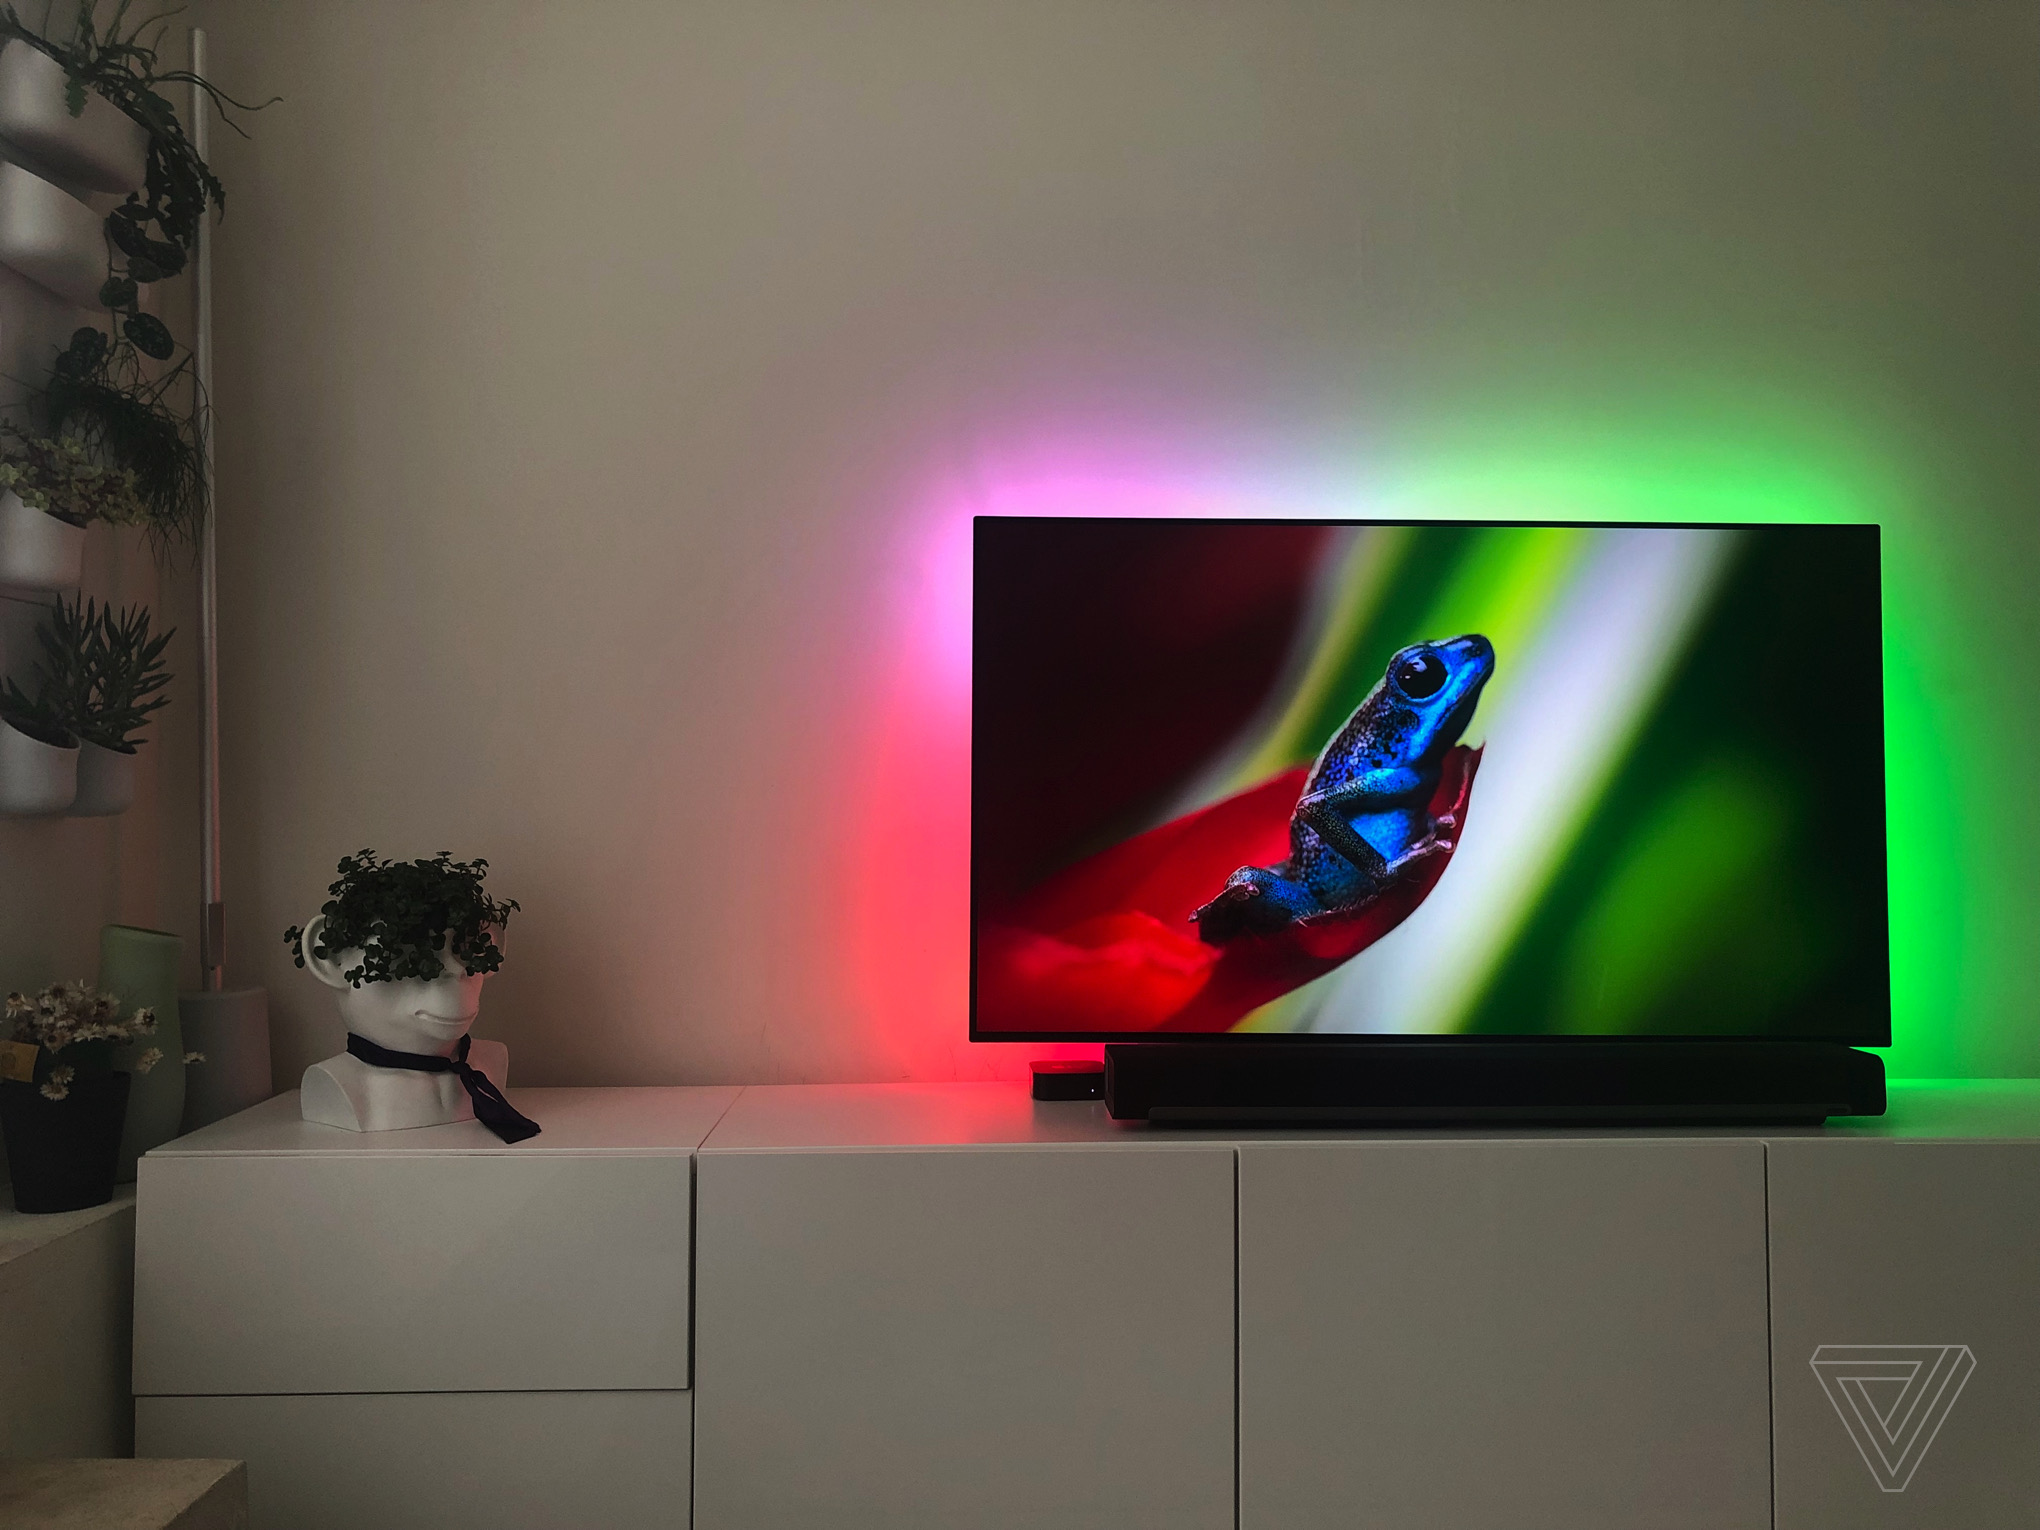 Govee Immersion TV Backlight review: Ambilight for less - The Verge